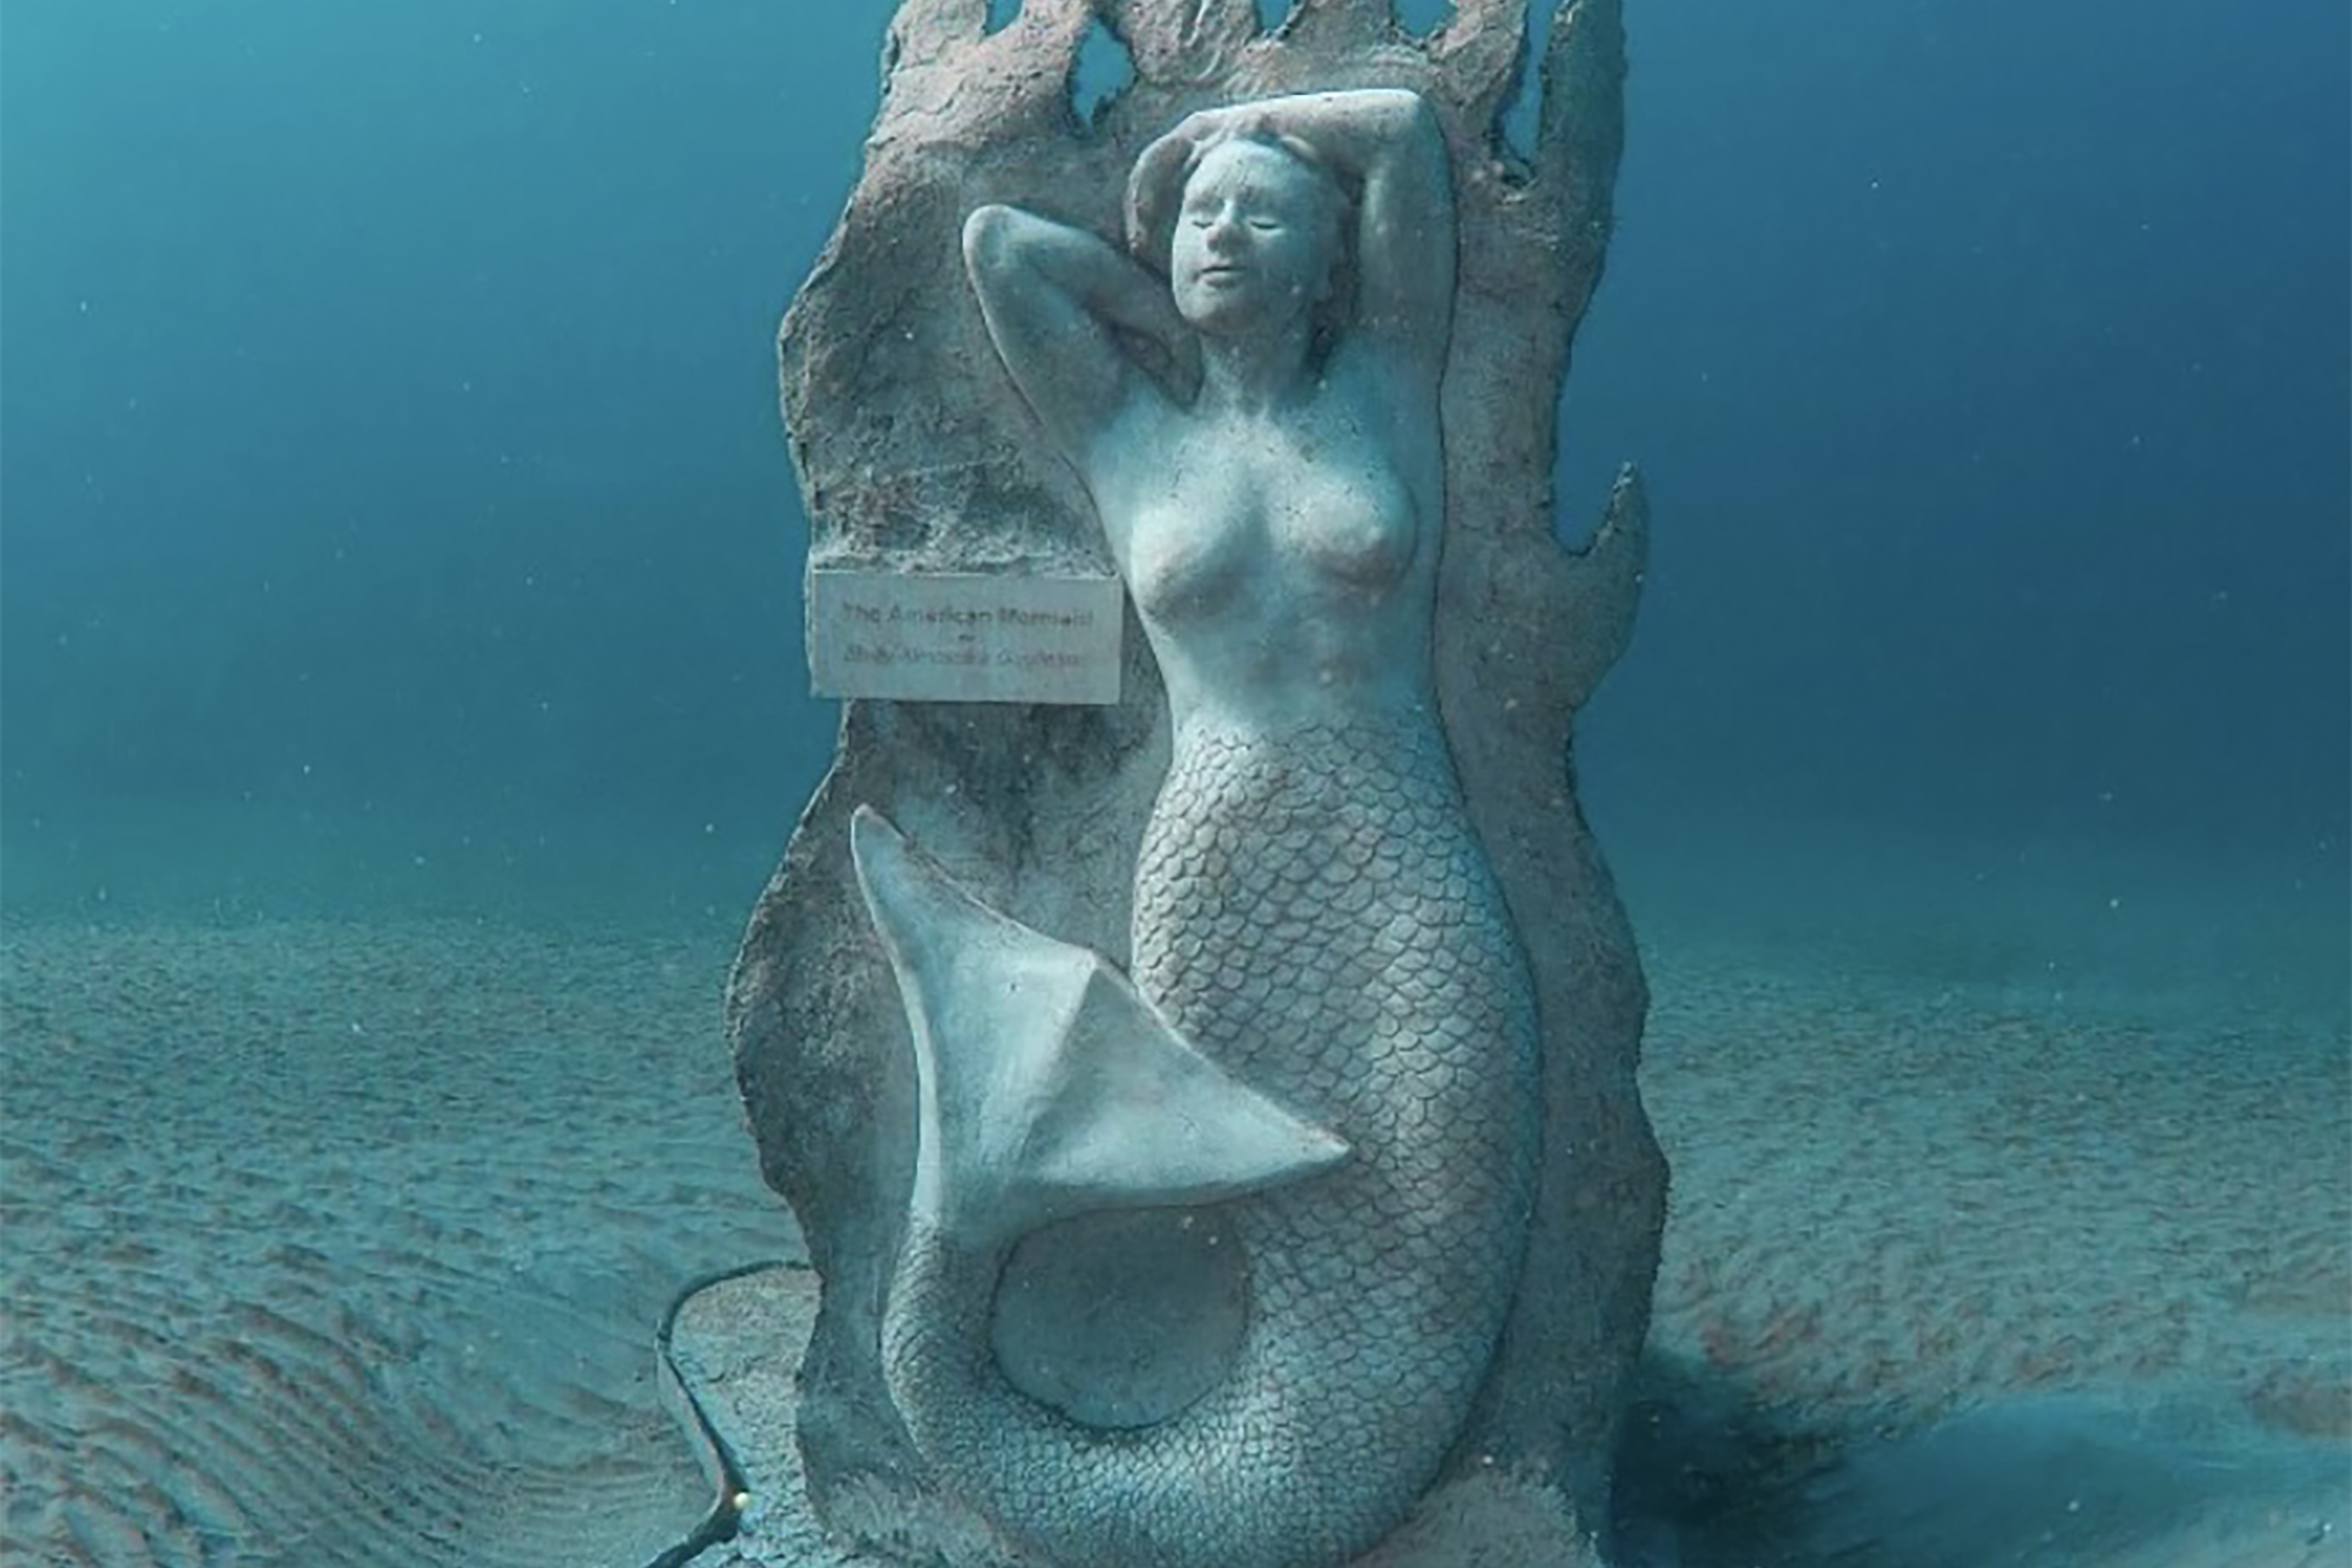 Emily Alexandra Guglielmo The American Mermaid™ Takes a Big Dive to Save Natural Reefs